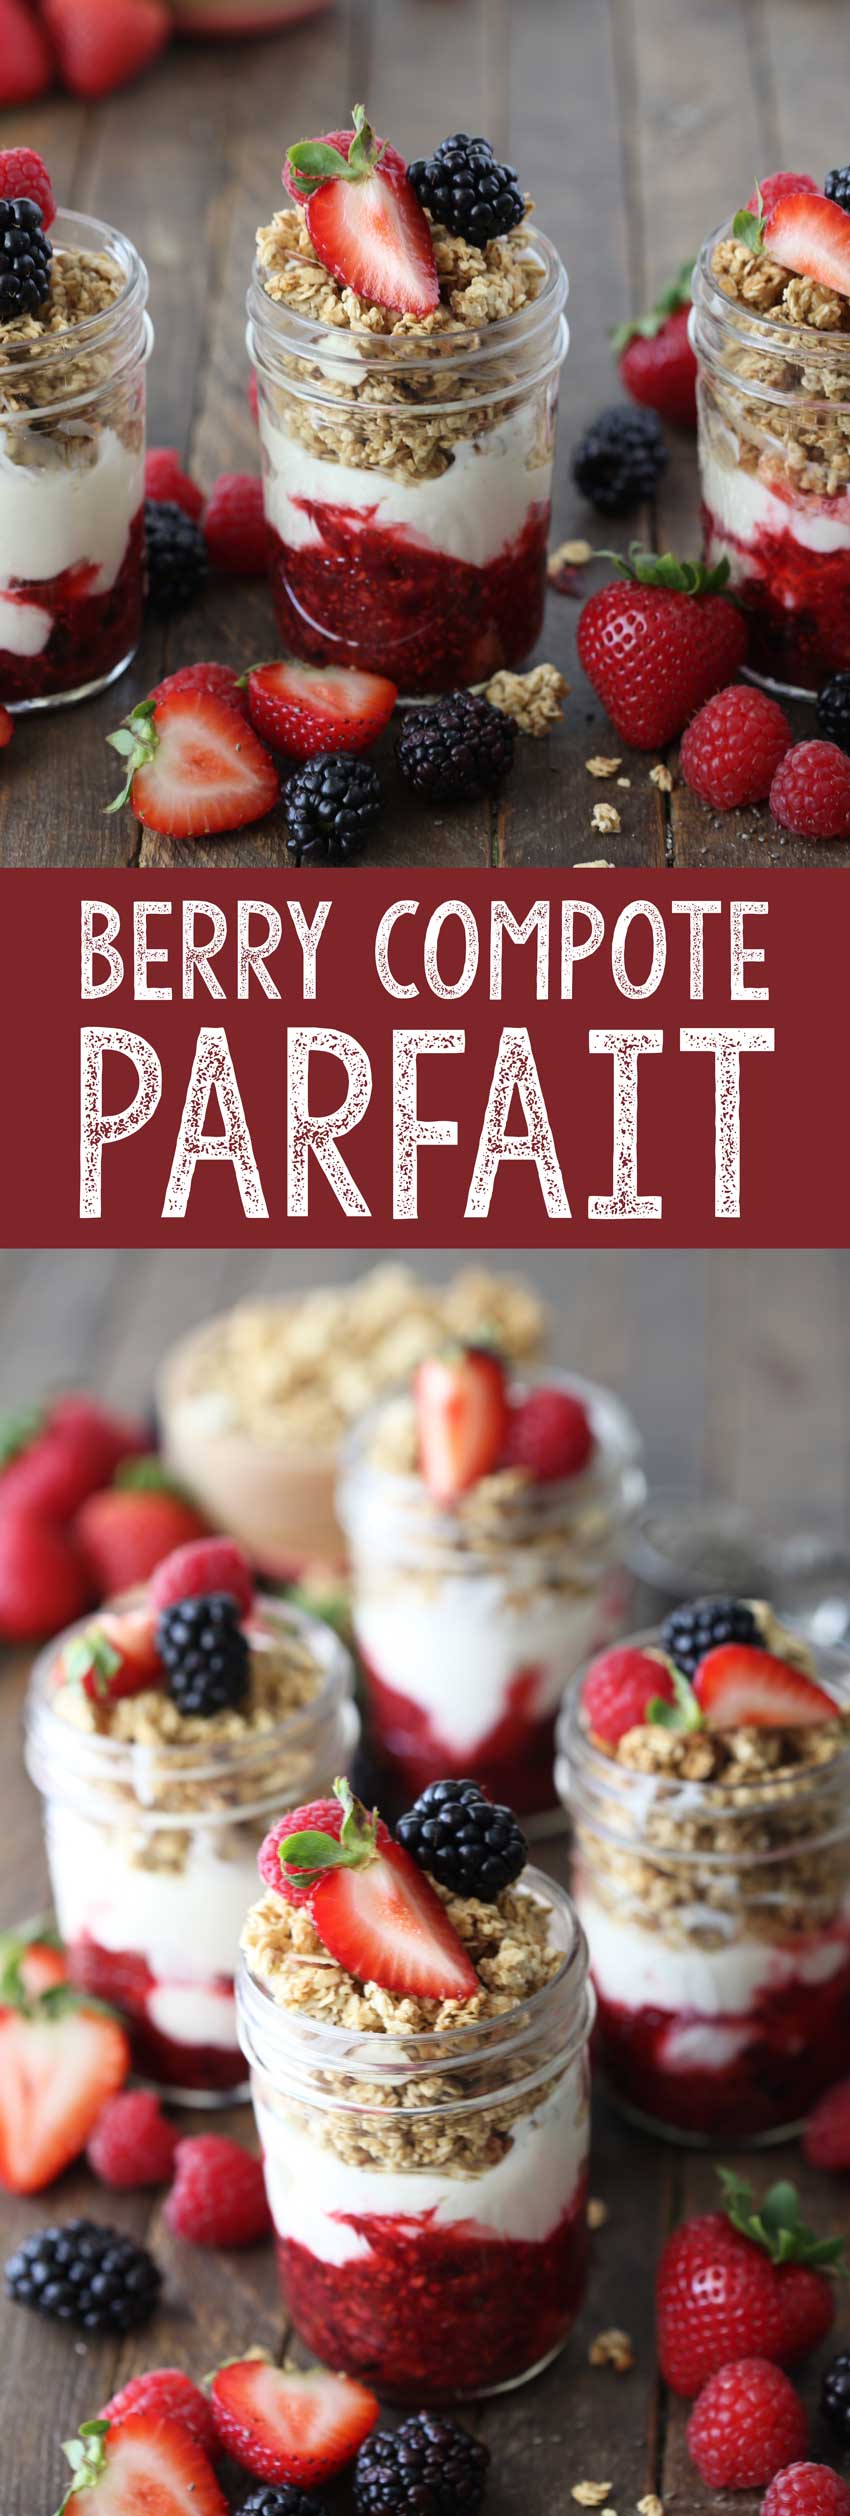 Berry Compote Parfait is a sweet and nutritious breakfast, snack, or dessert! 